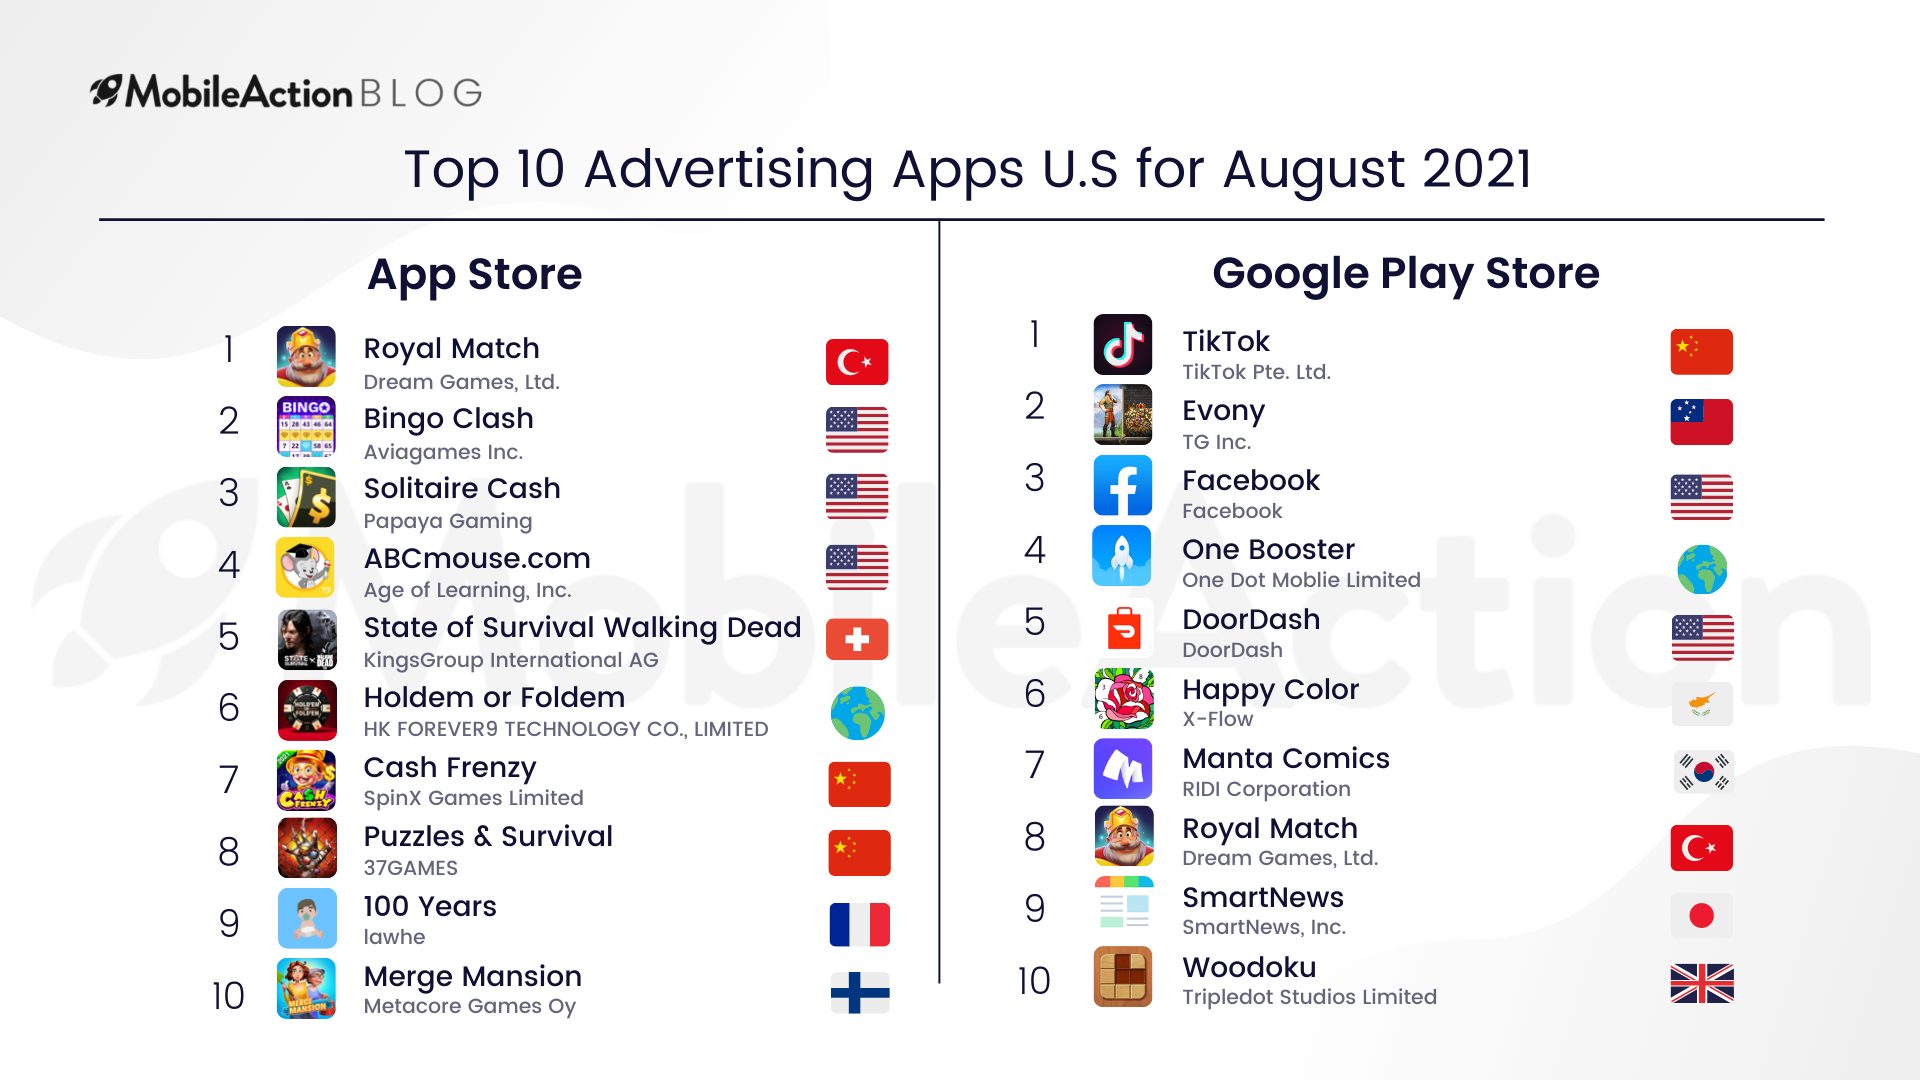 Top Advertising Apps in the US August 2021